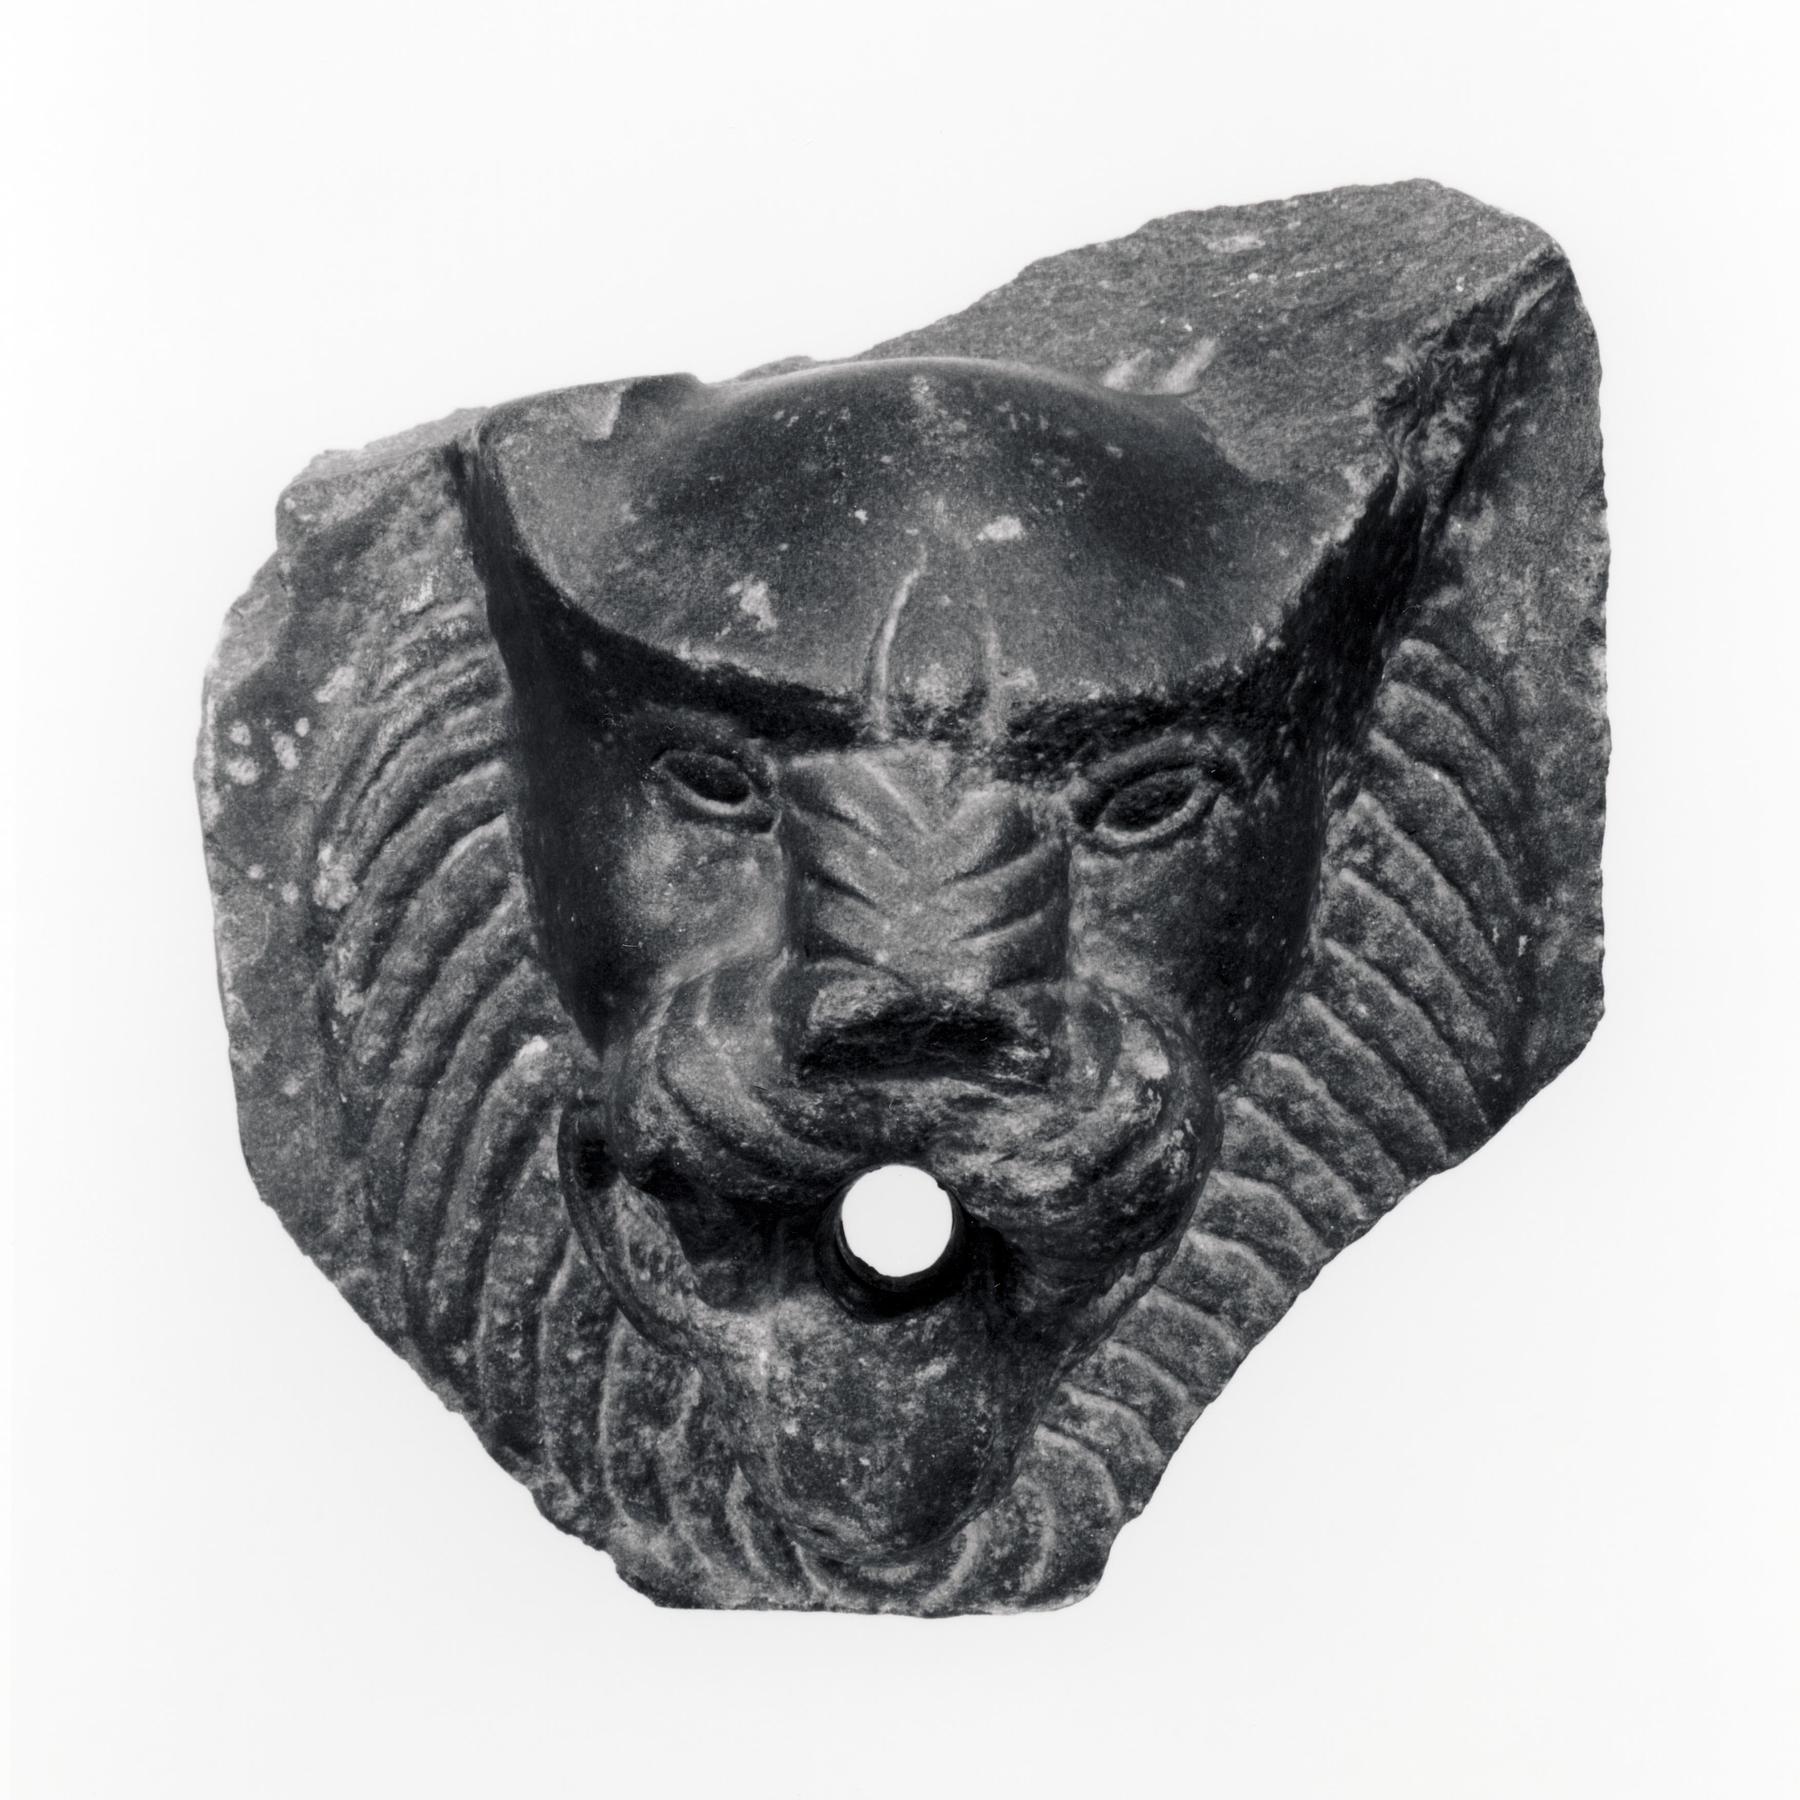 Water spout in the shape of a lion's head, H332